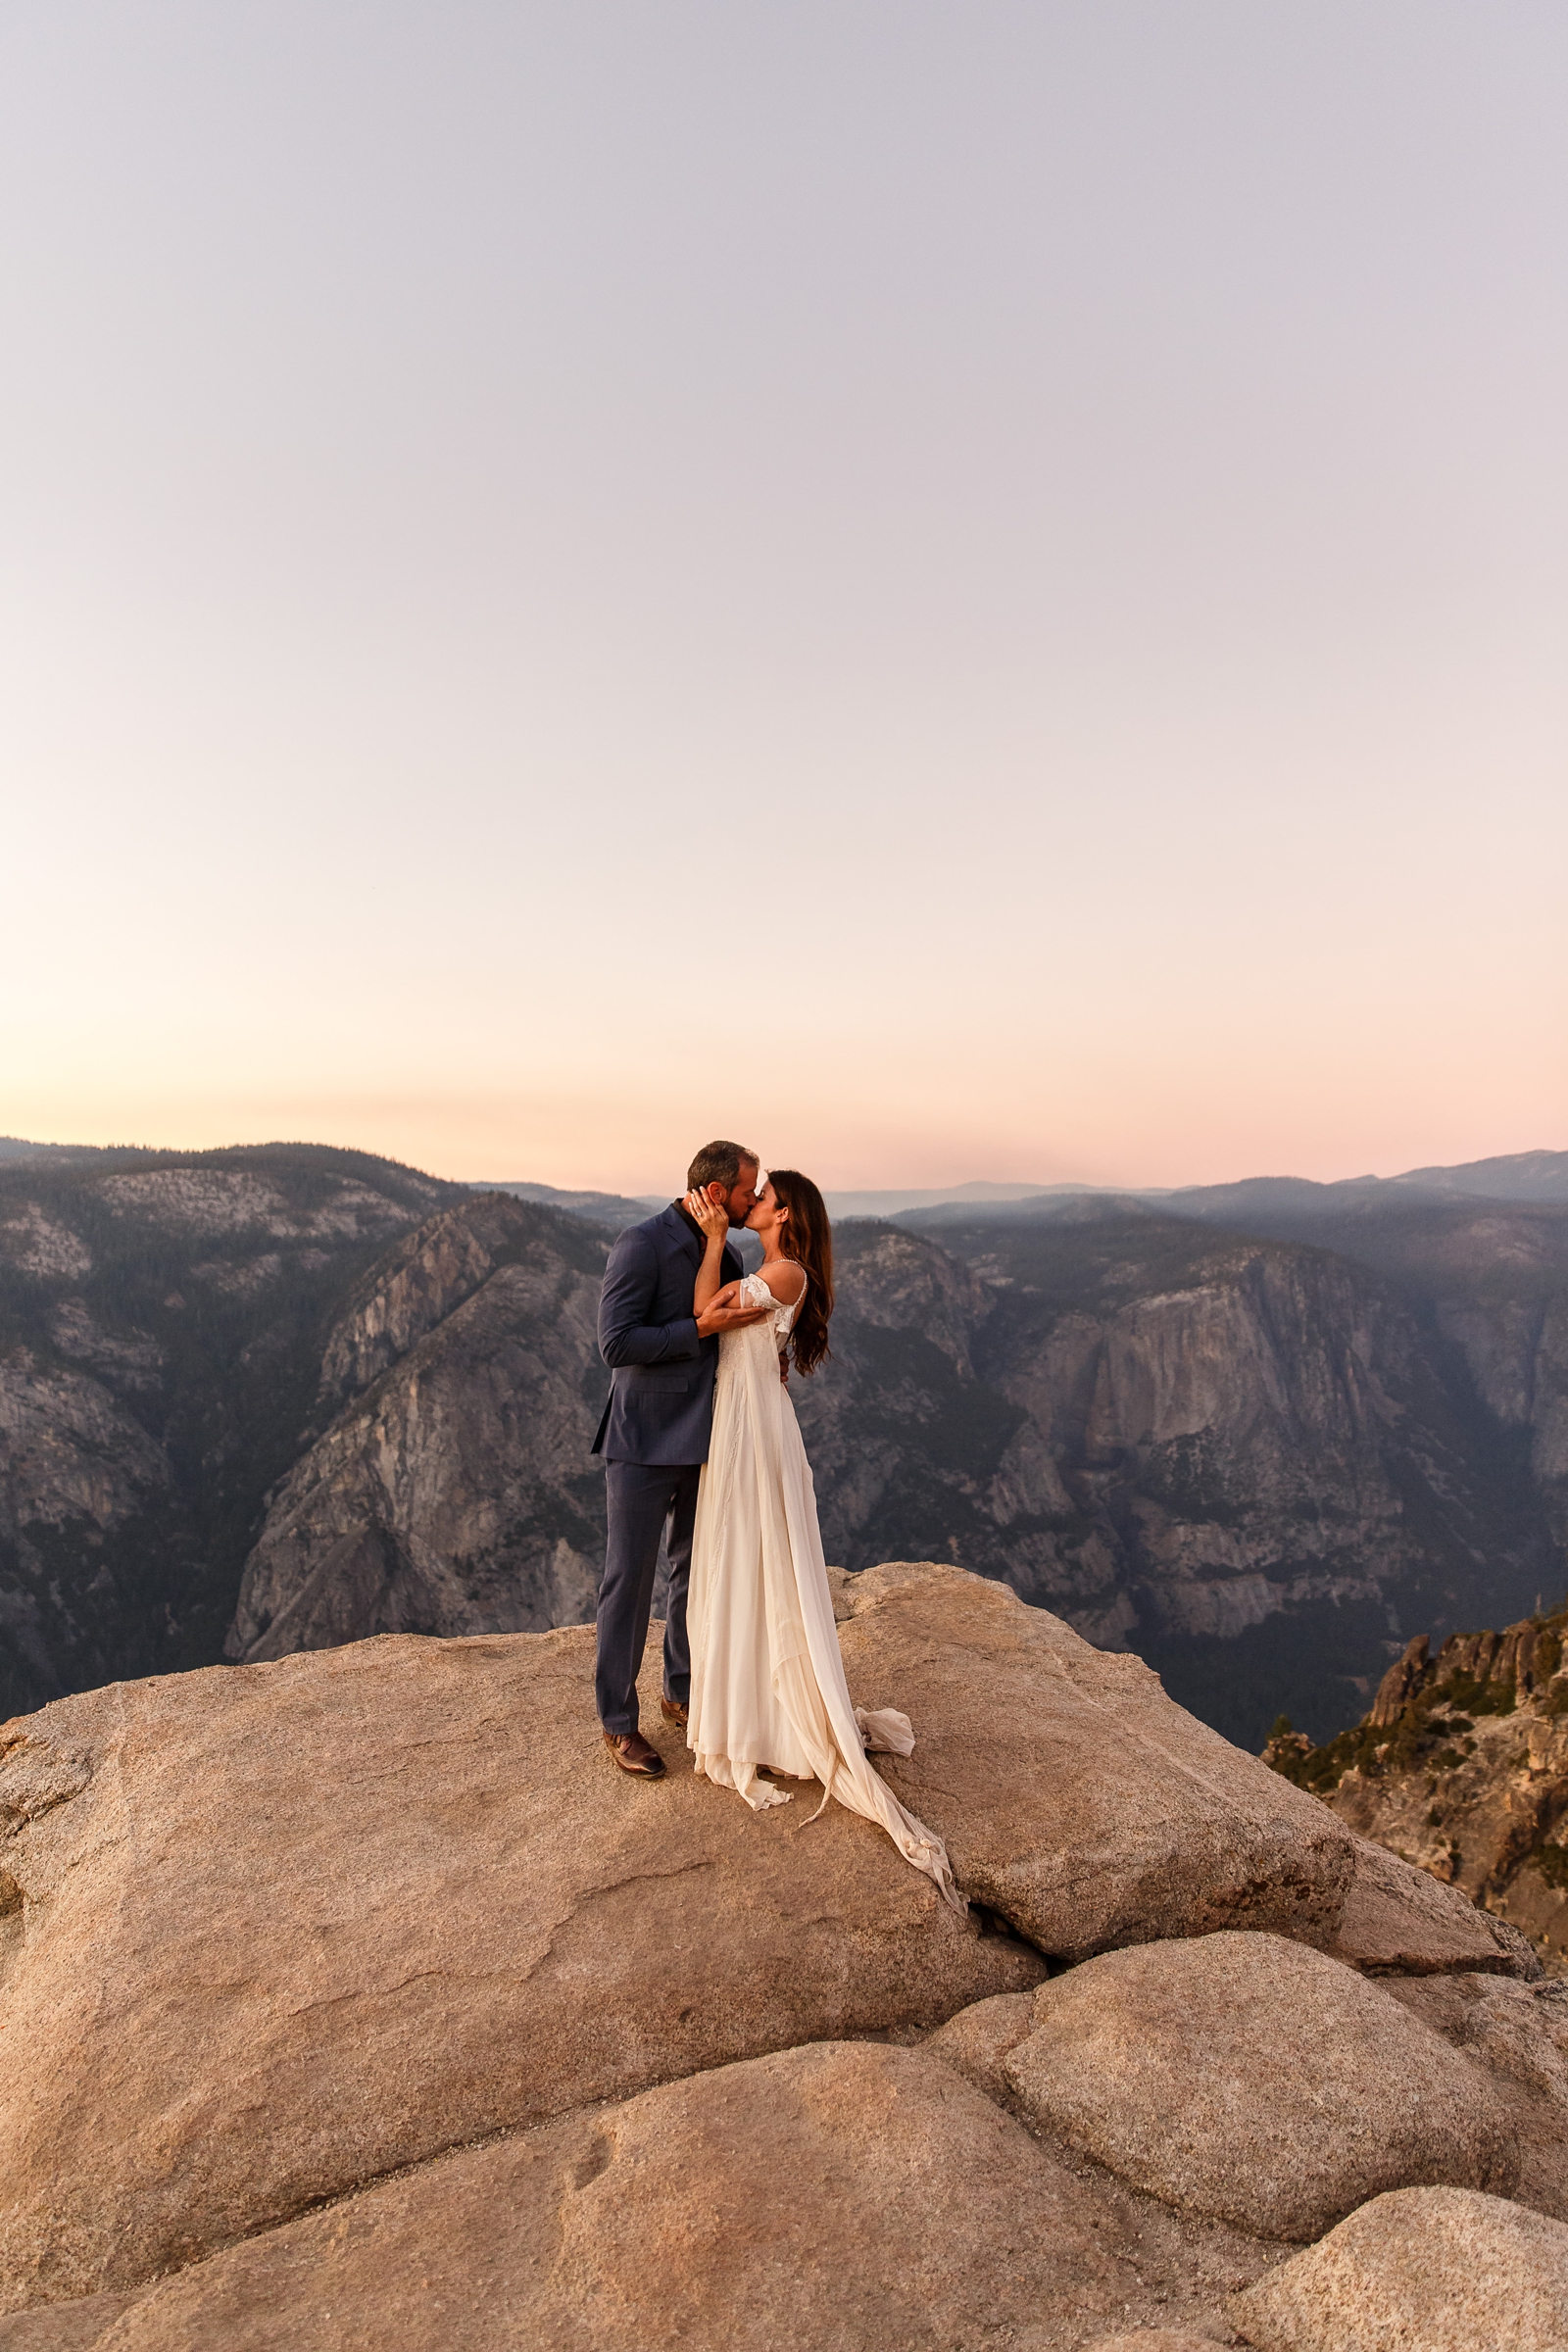 A couple gently kissing at their sunset Yosemite NP elopement.